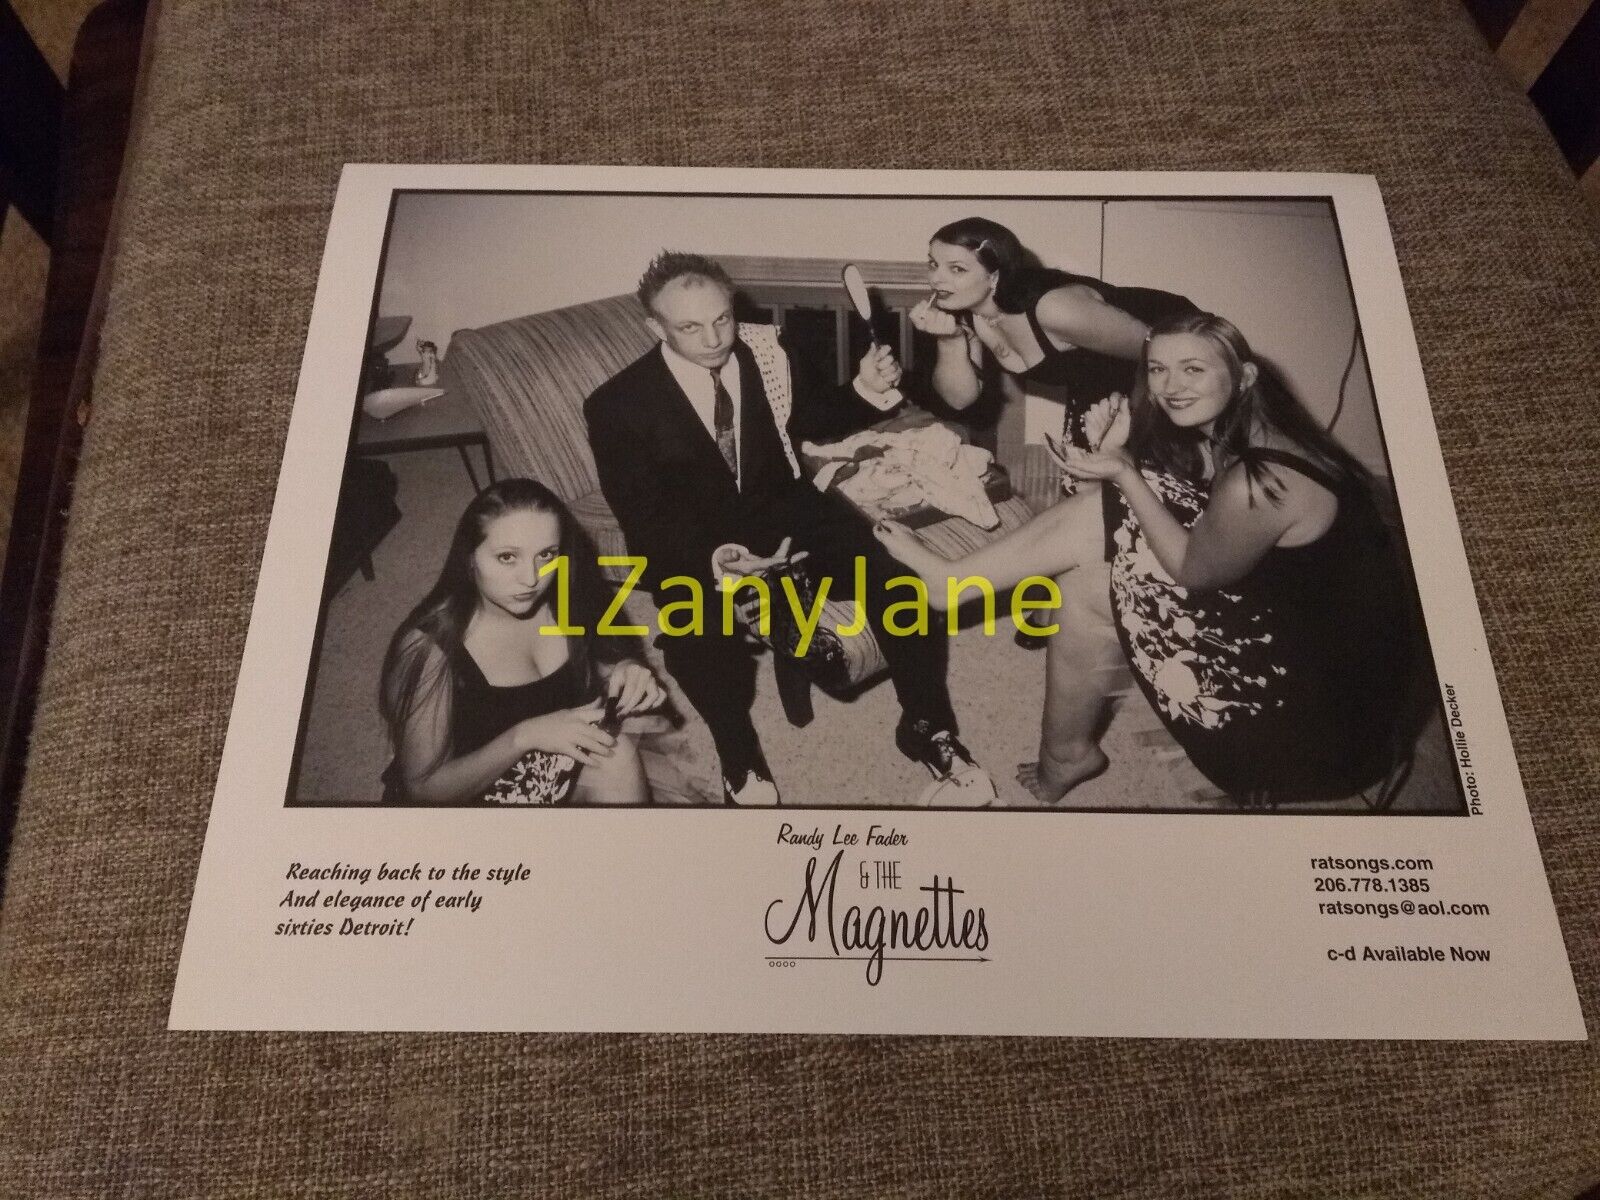 P487 Band 8x10 Press Photo PROMO MEDIA RANDY LEE FADER & THE MAGNETTES